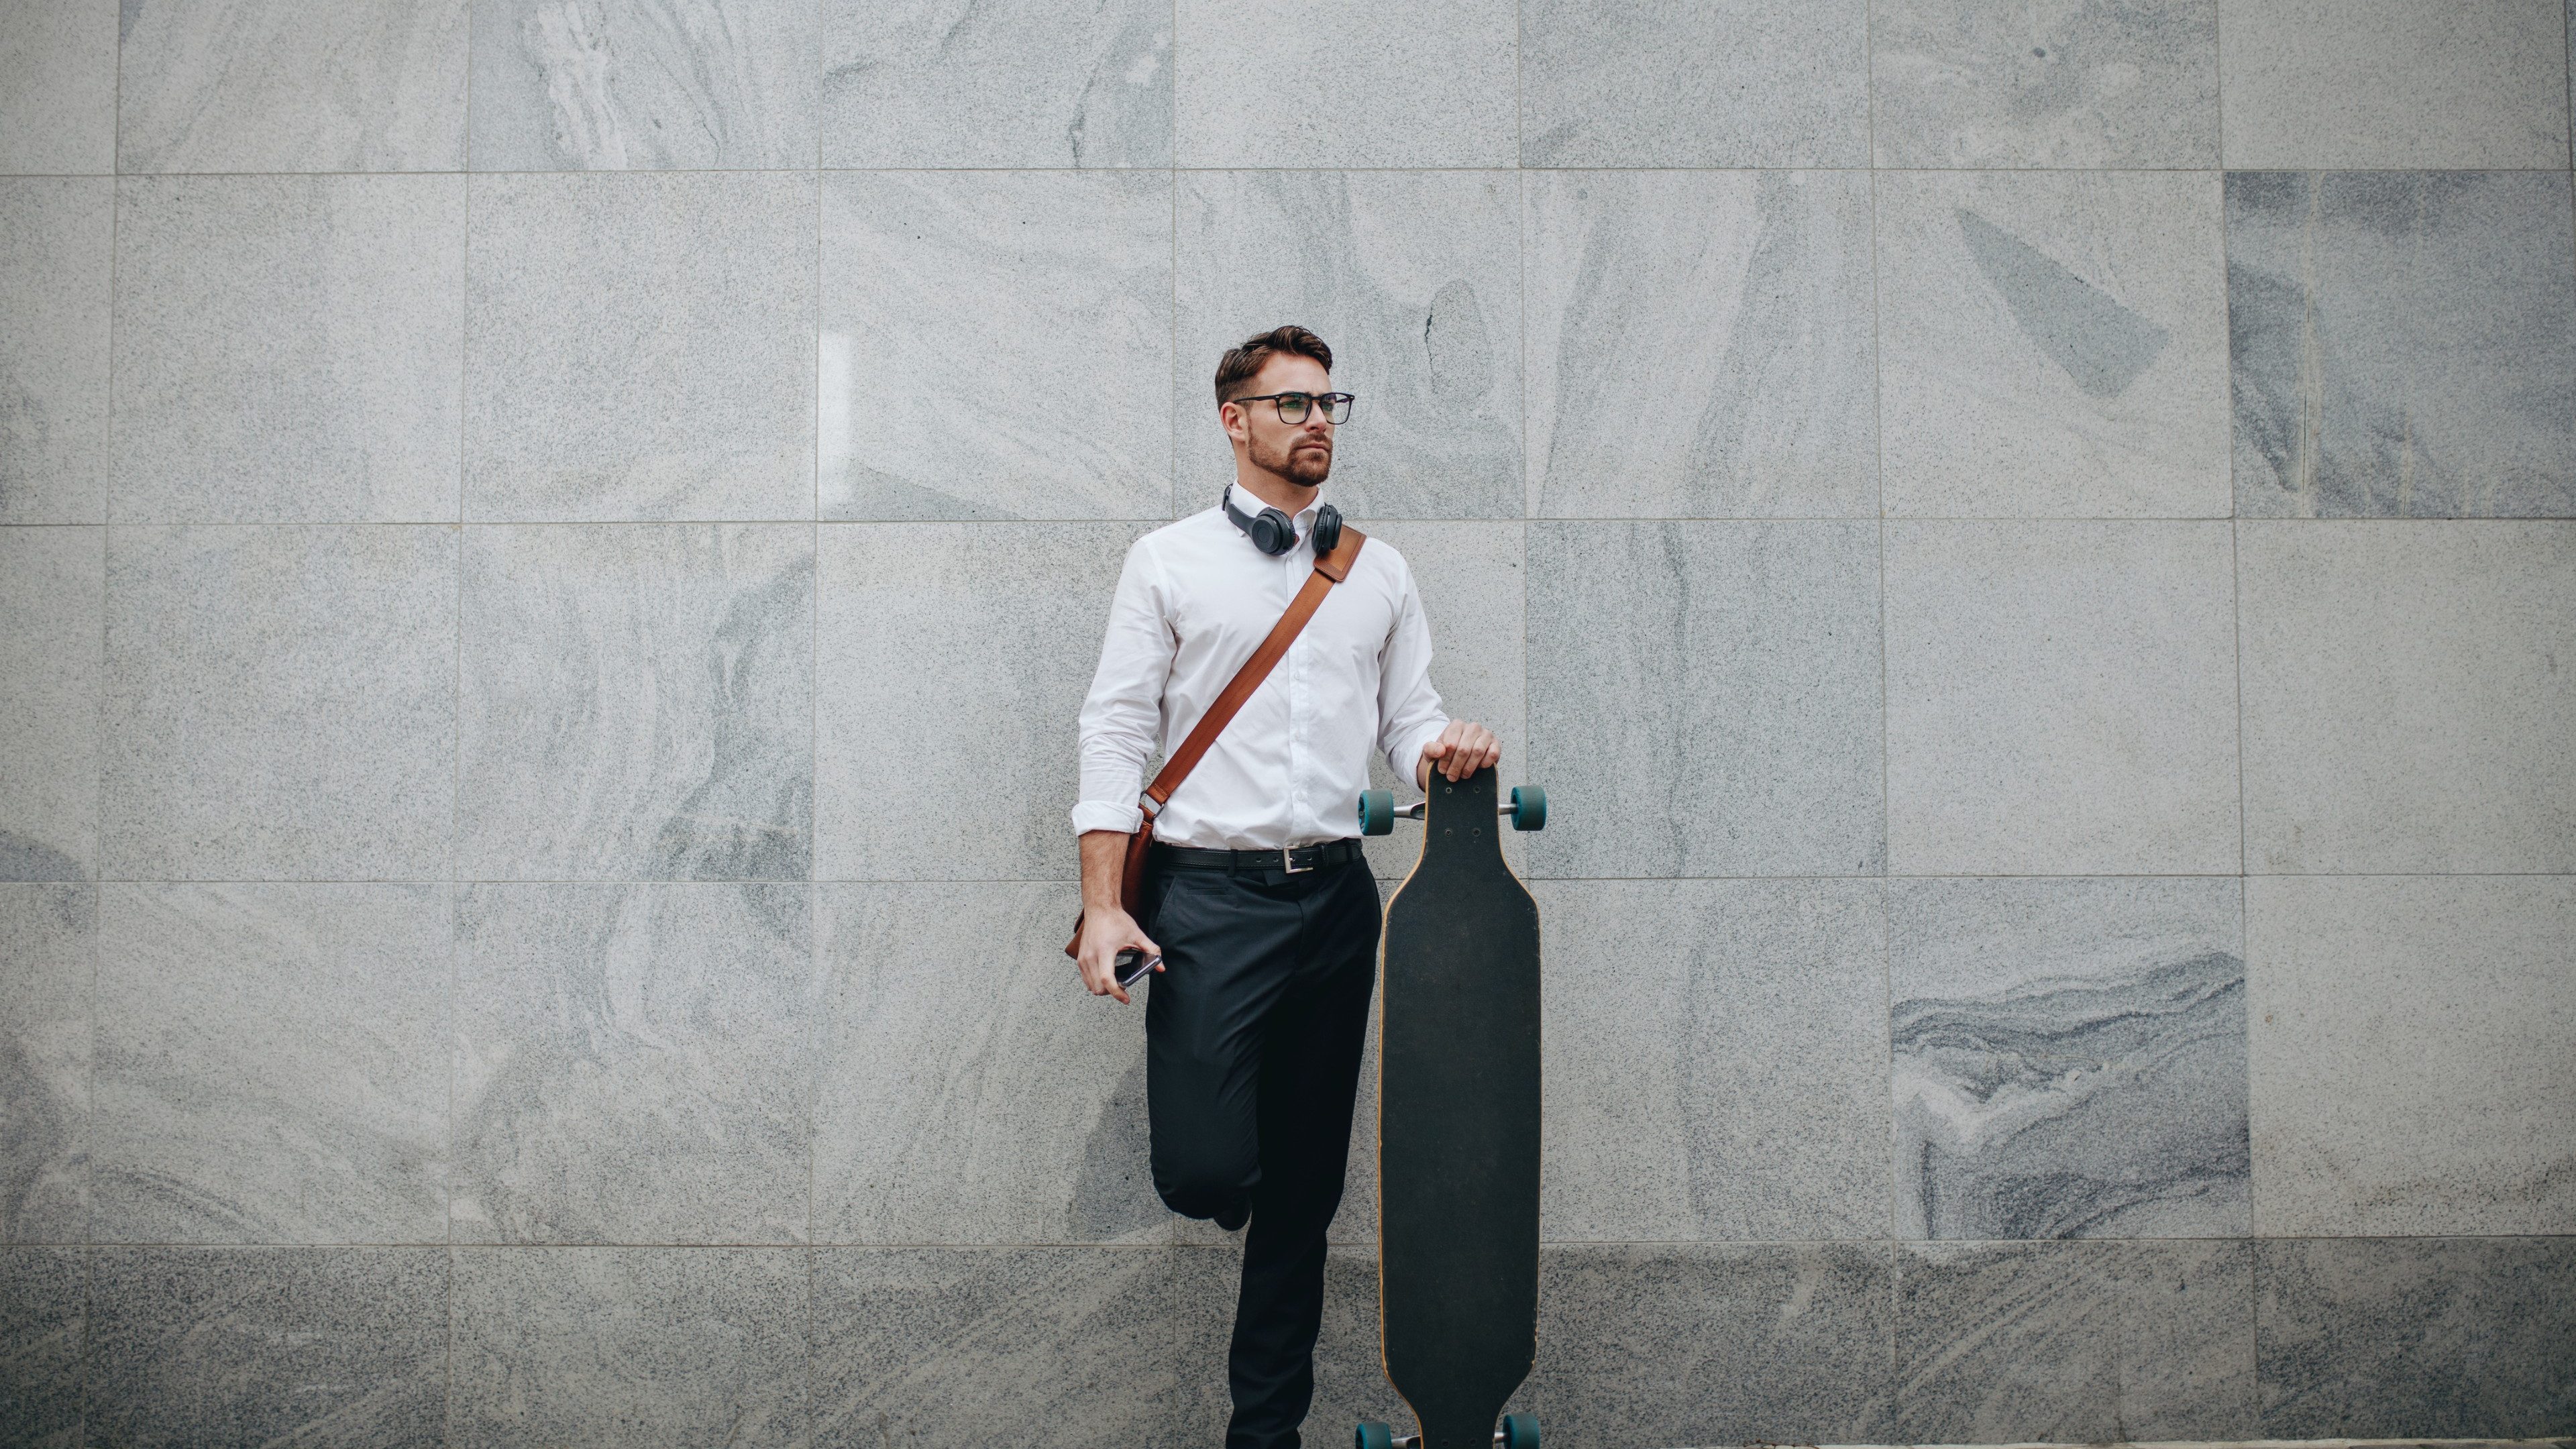 Formally dressed man standing in street with a longboard. Businessman standing against a wall outdoors holding a long skateboard.